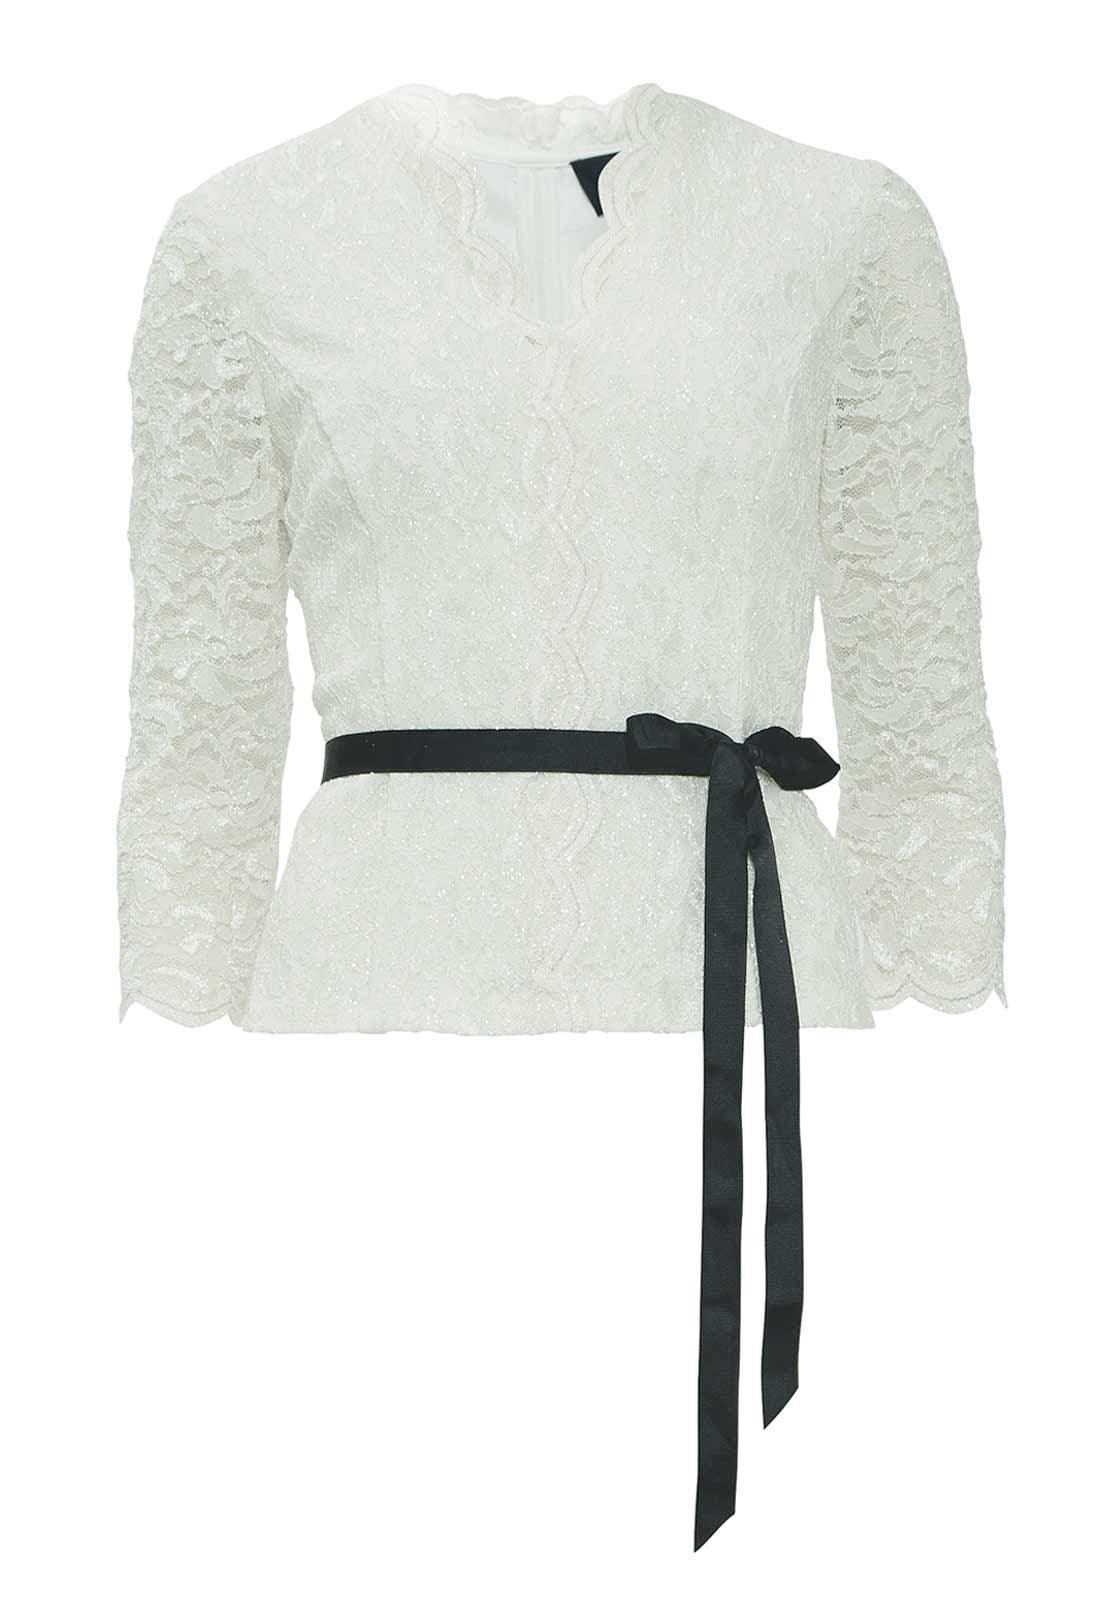 Gina Bacconi Tilly Lace Top